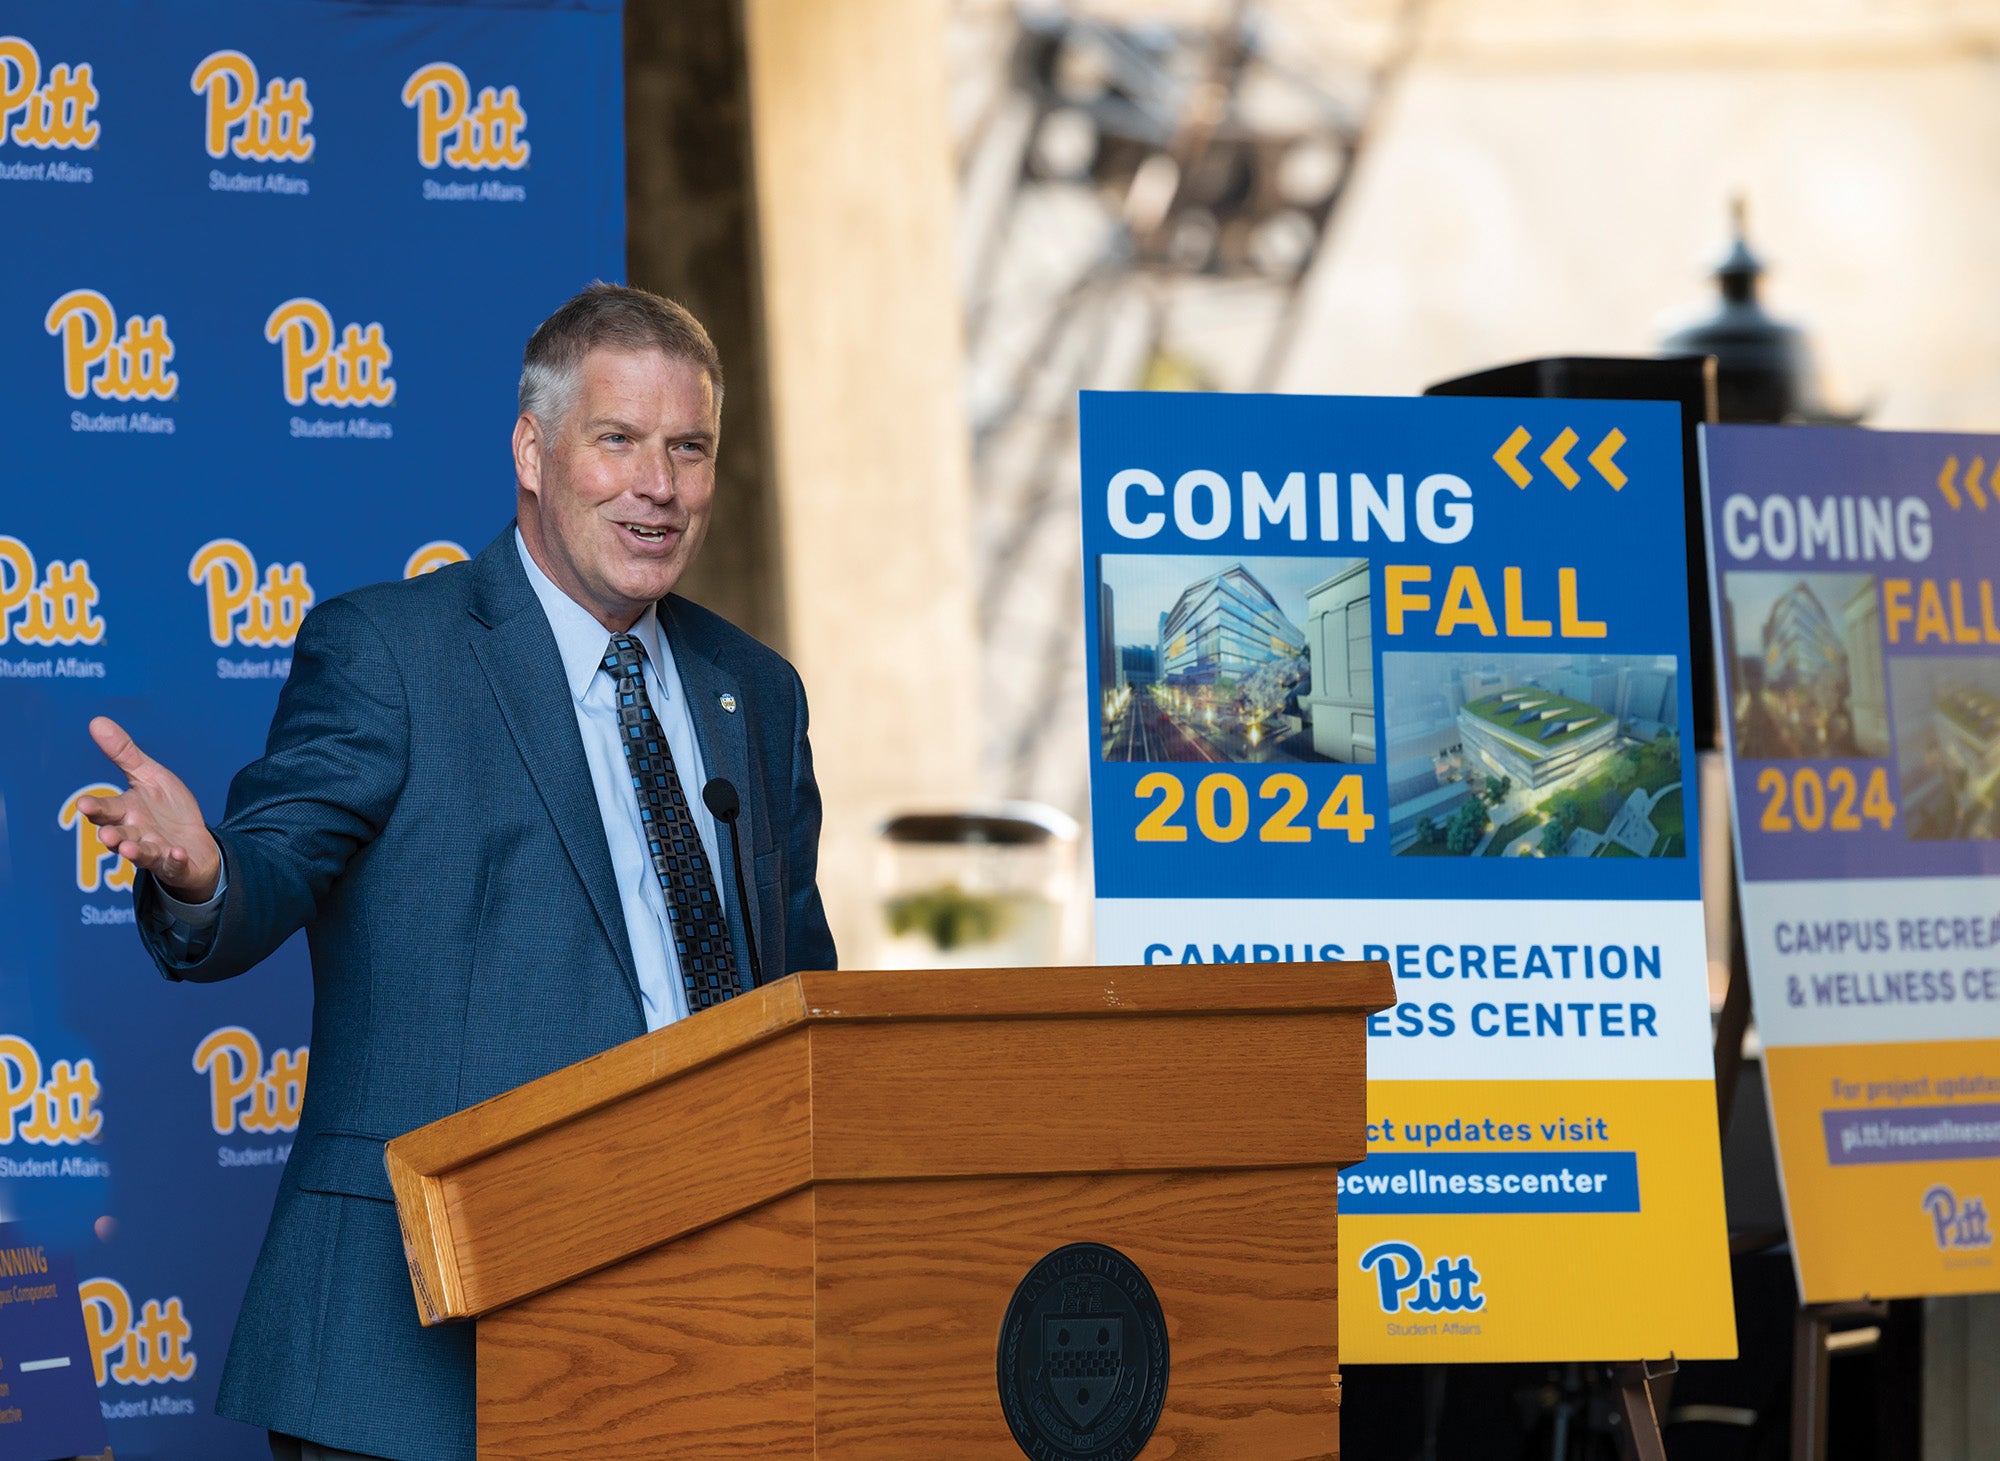 Gallagher speaks at a podium next to a sign advertising a new building